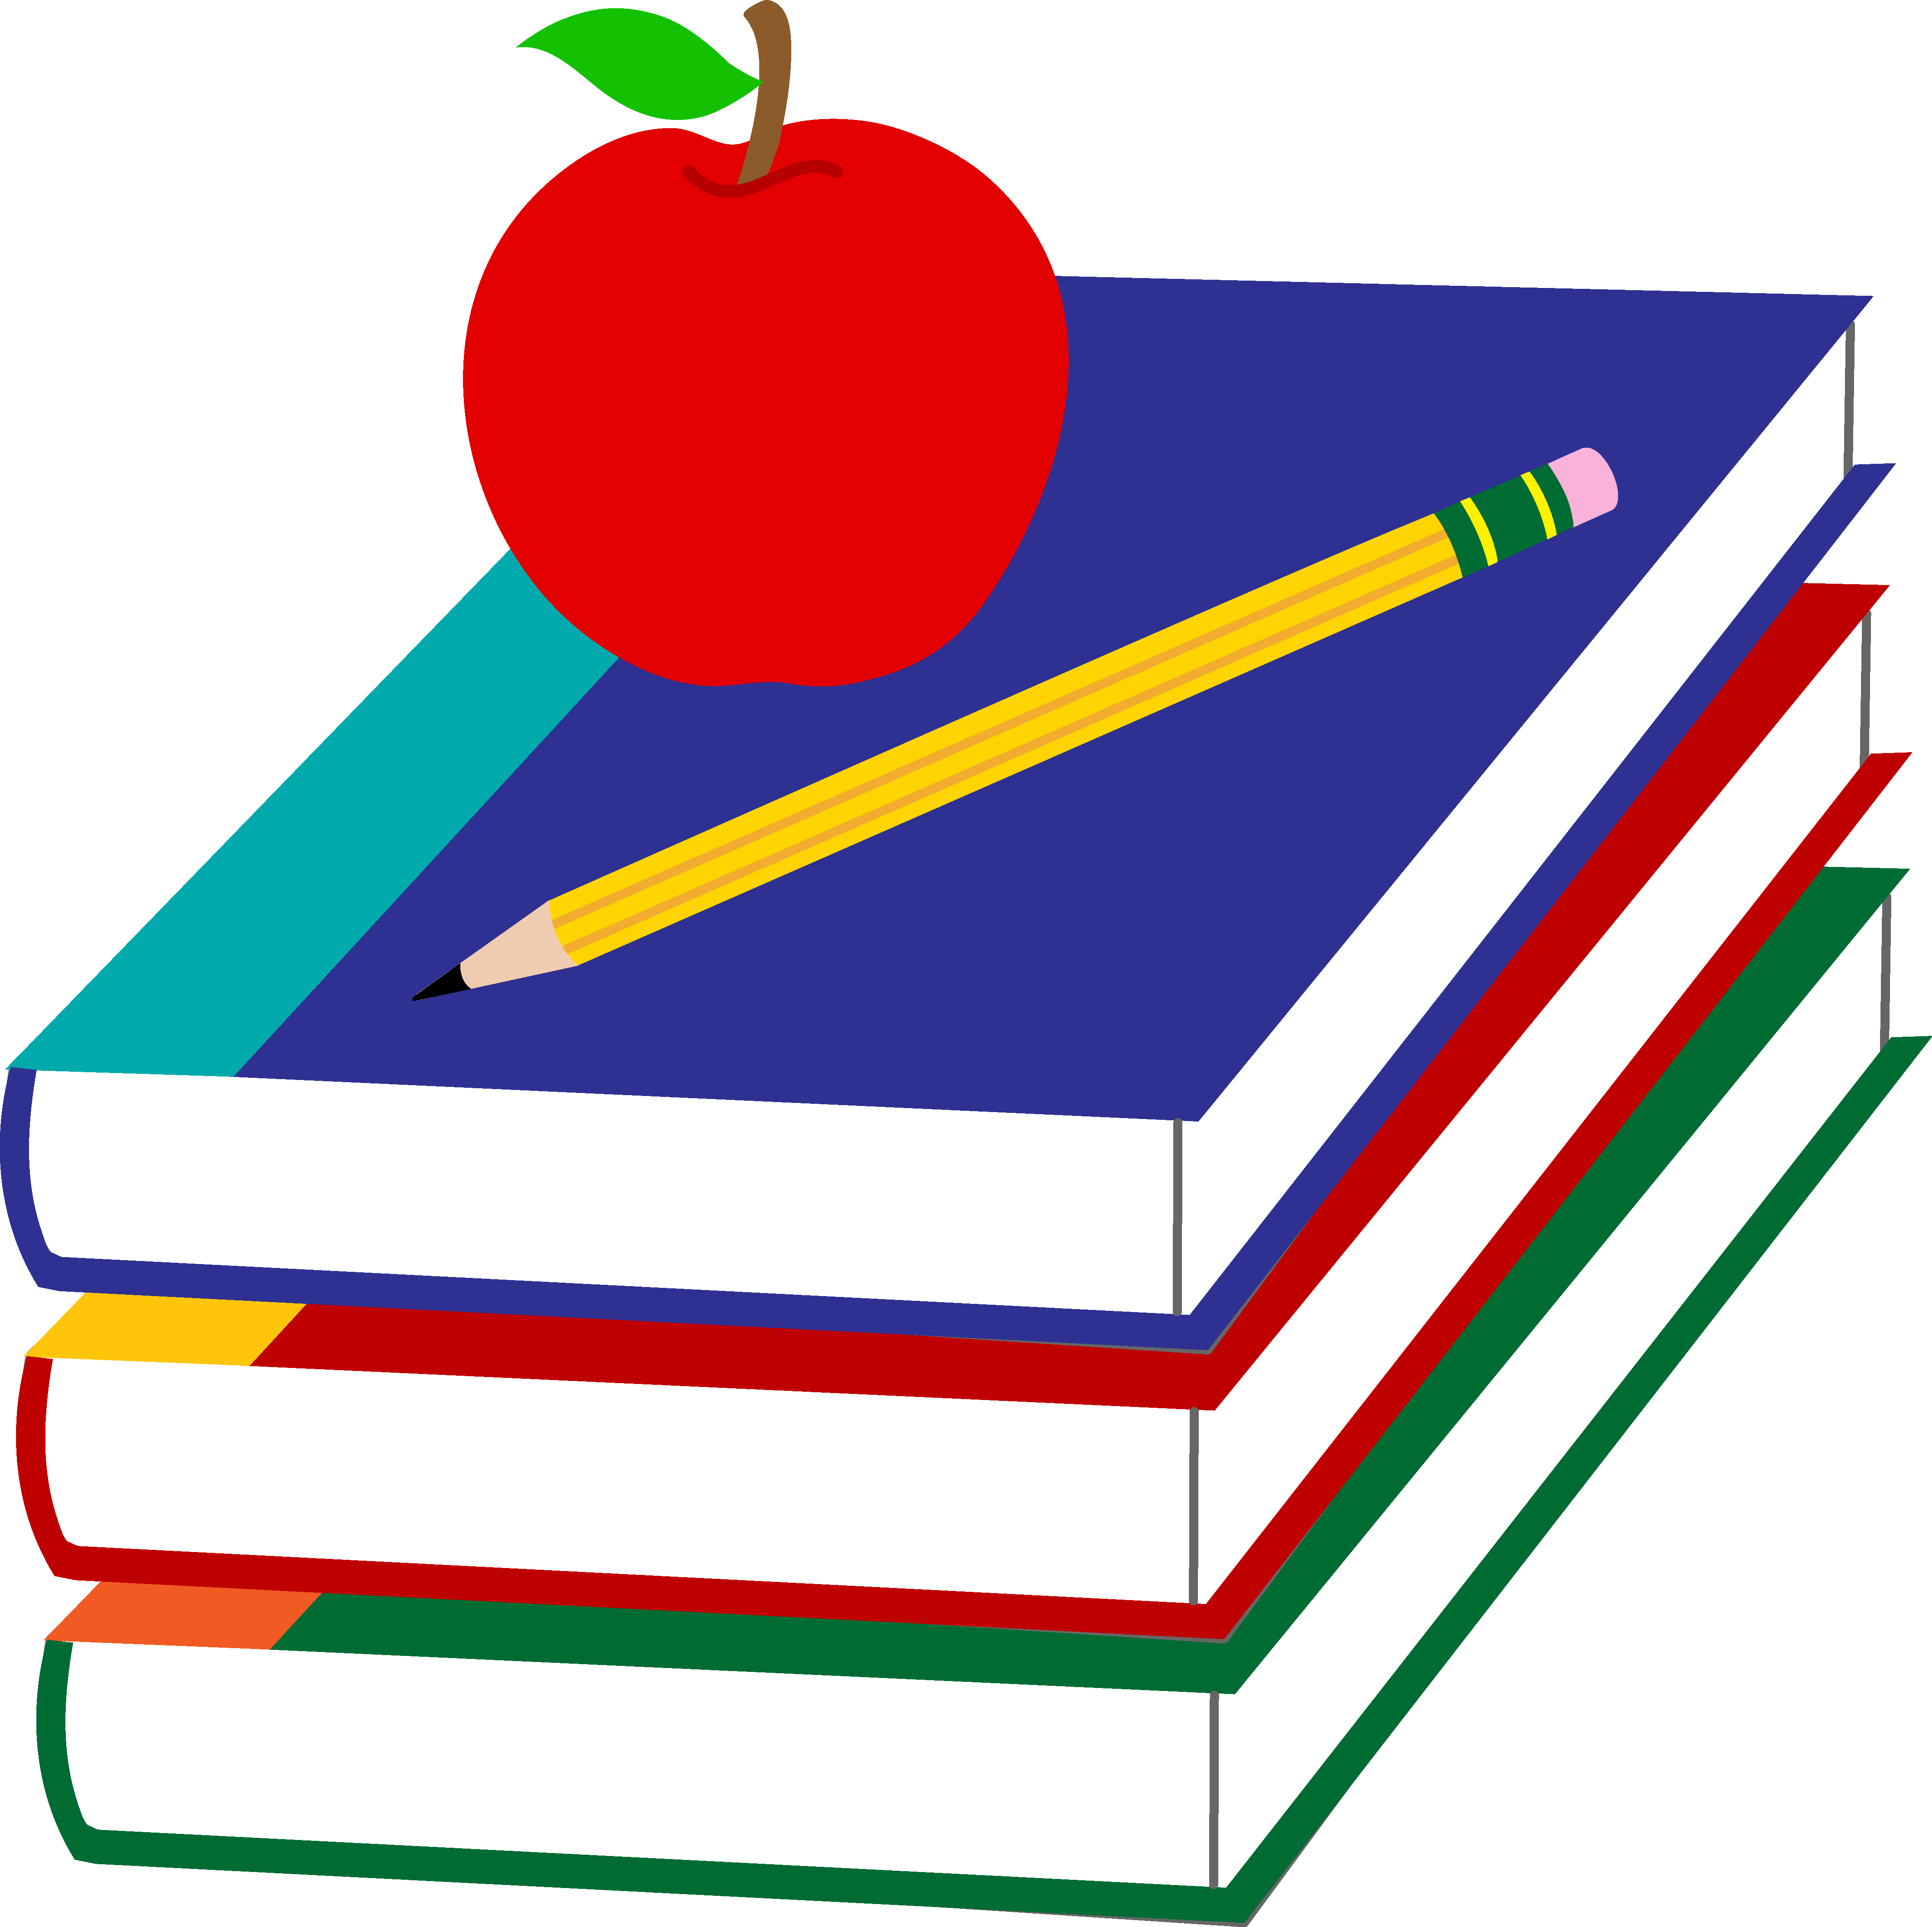 Clipart books knowledge. Apple and book png